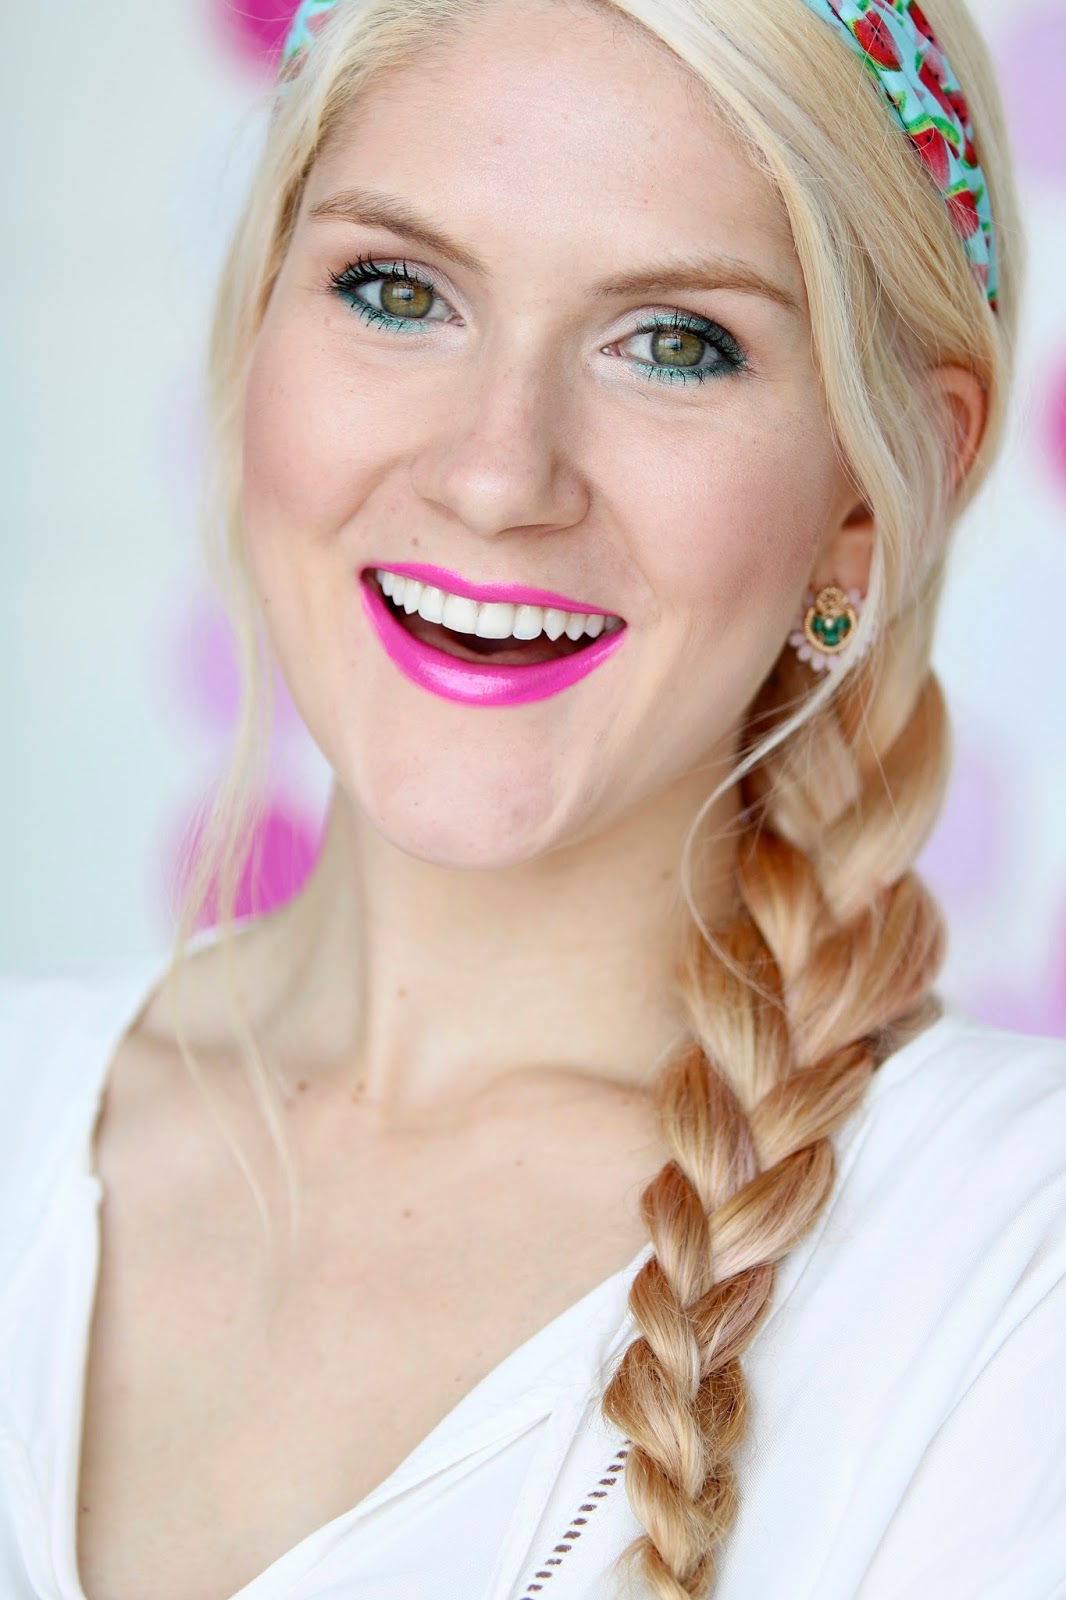 Click through for the full tutorial on this bright Summer makeup!